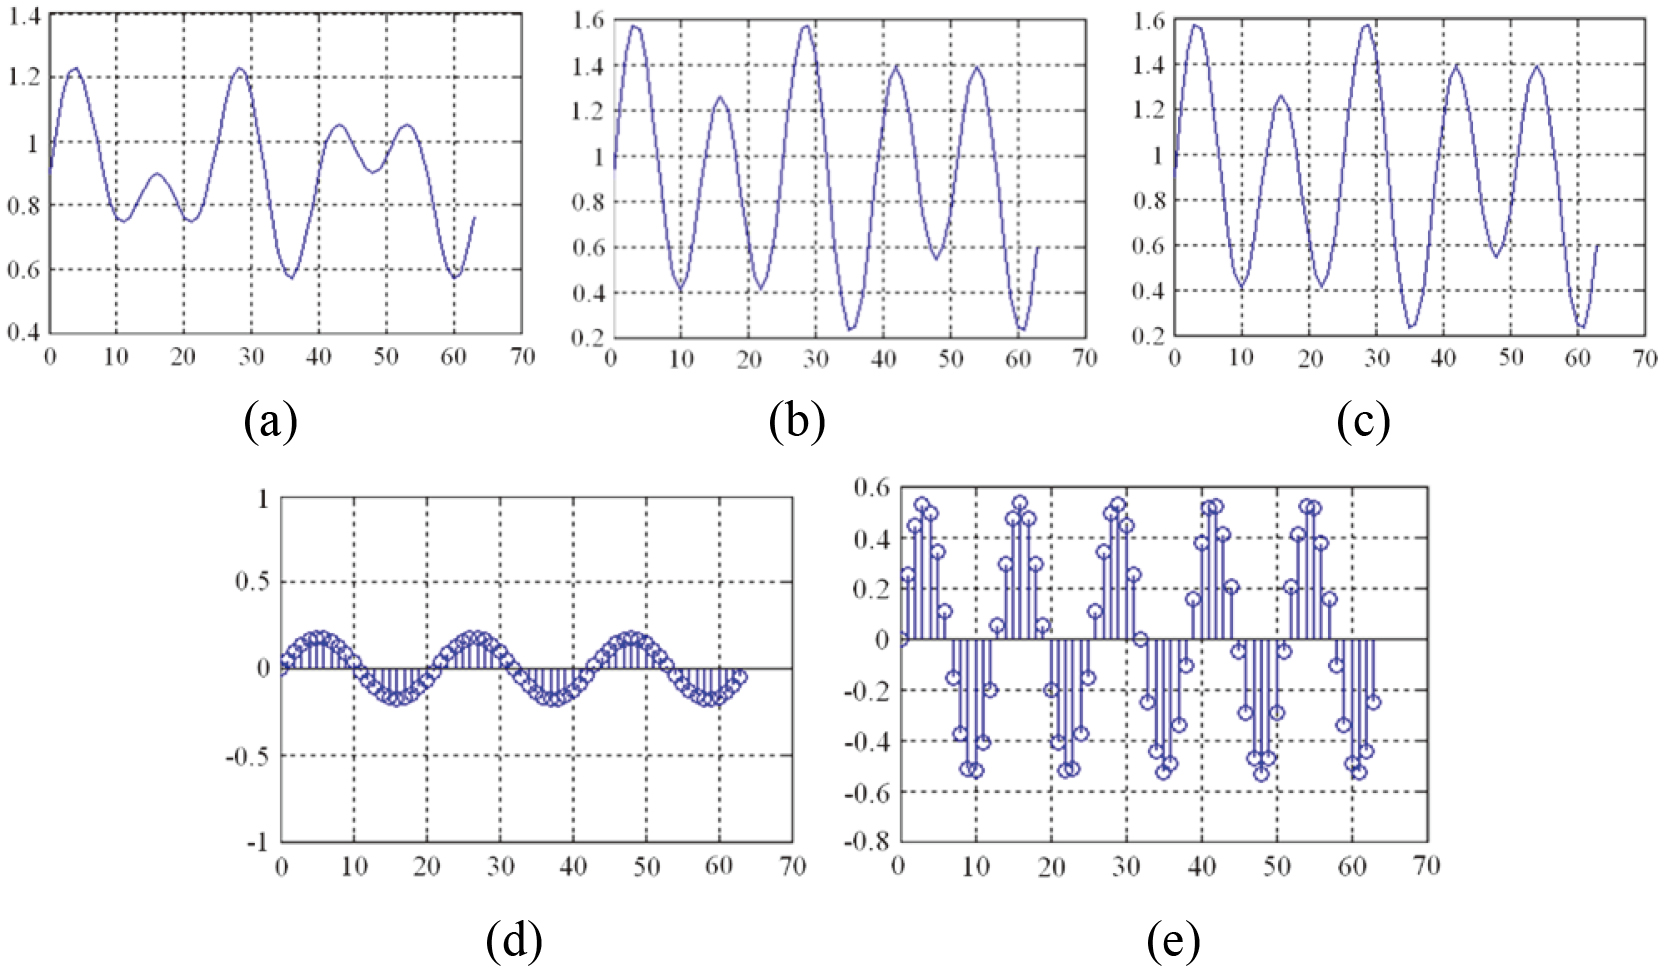 Simulation results of gain-applied IFFT: (a) input signal, (b) result of applying gain to input signal, (c) result of gain-applied IFFT using proposed method, (d) gain signal applied to channel 2, and (e) gain signal applied to channel 3.